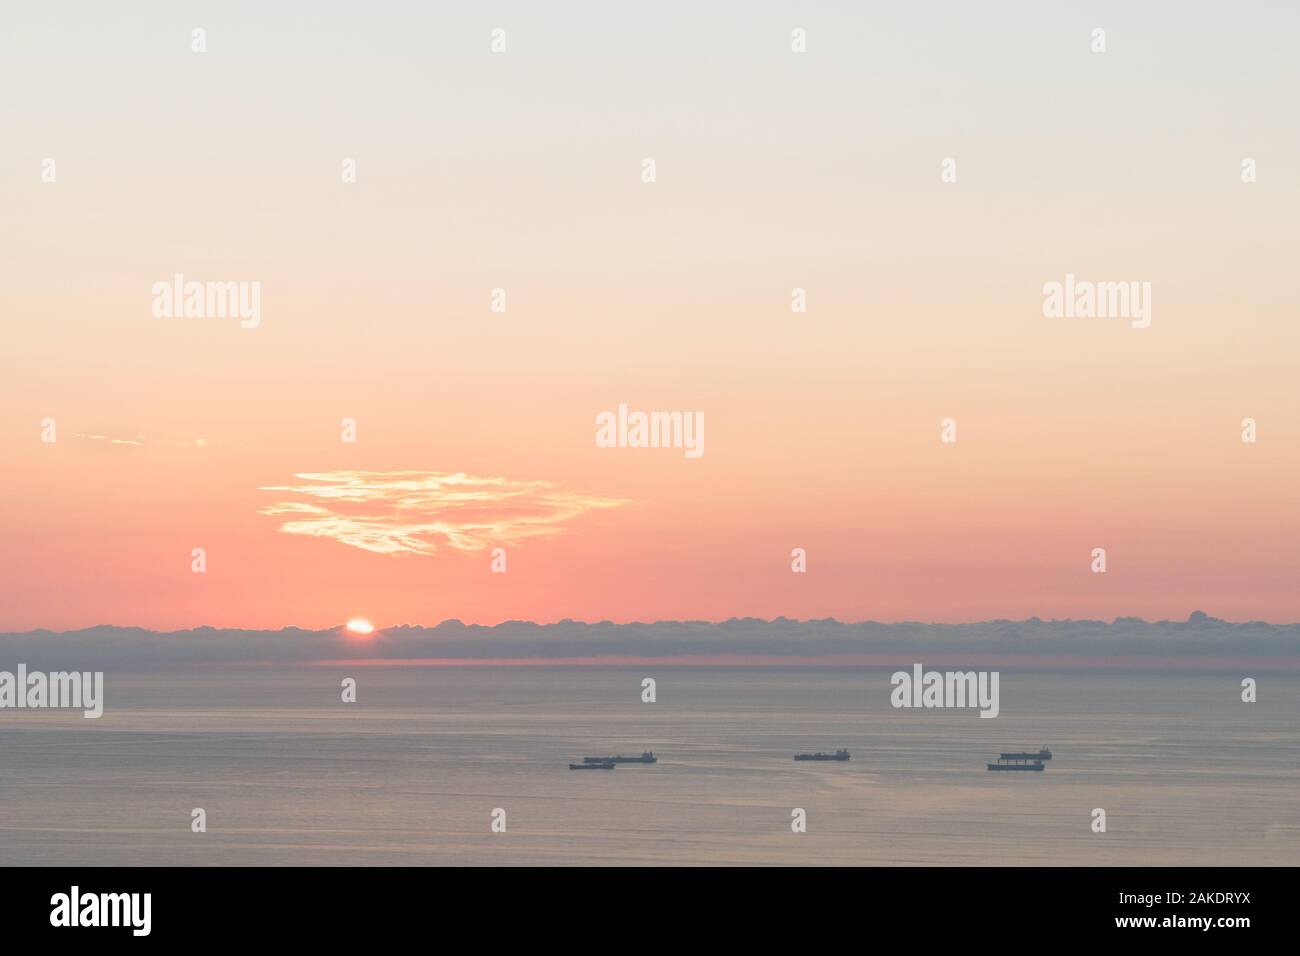 Minimalist shot of the sun peaking over the horizon over the water. The sky is a blue pink gradient. Stock Photo